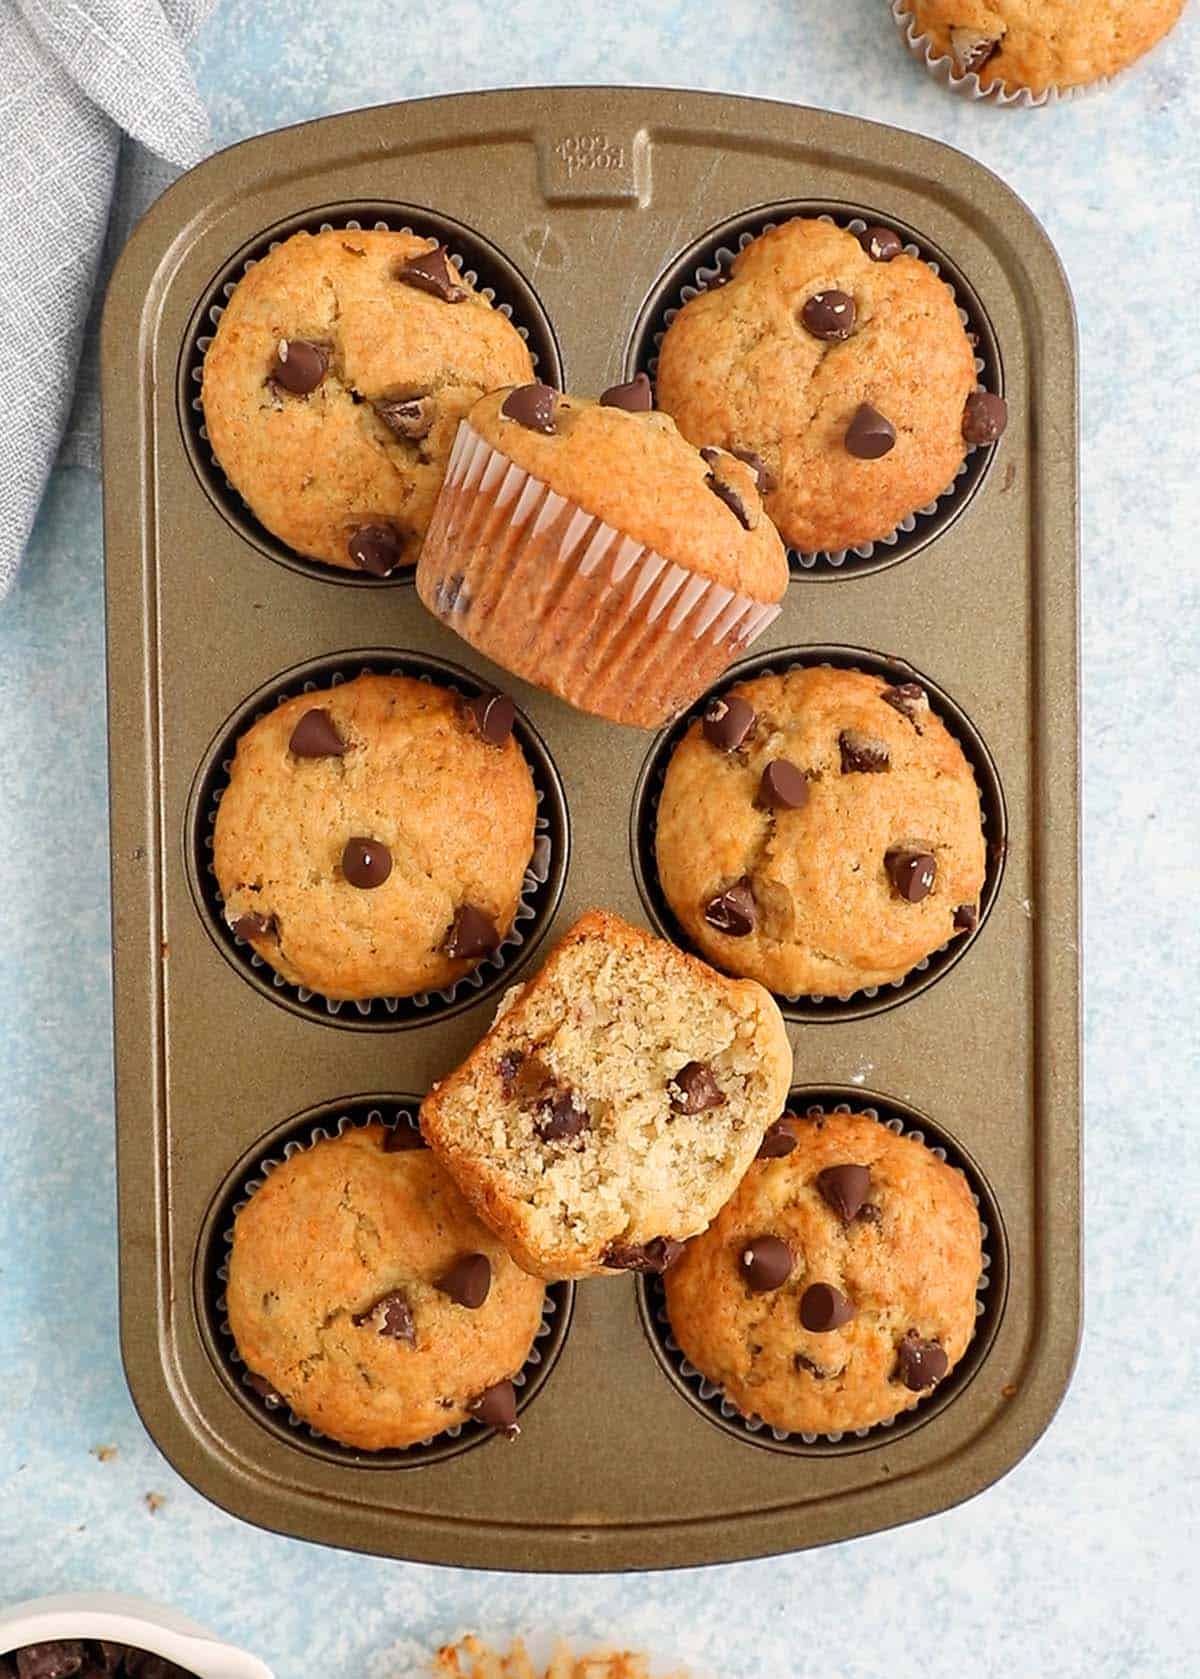 6 baked banana chocolate chip muffins in a muffin pan.